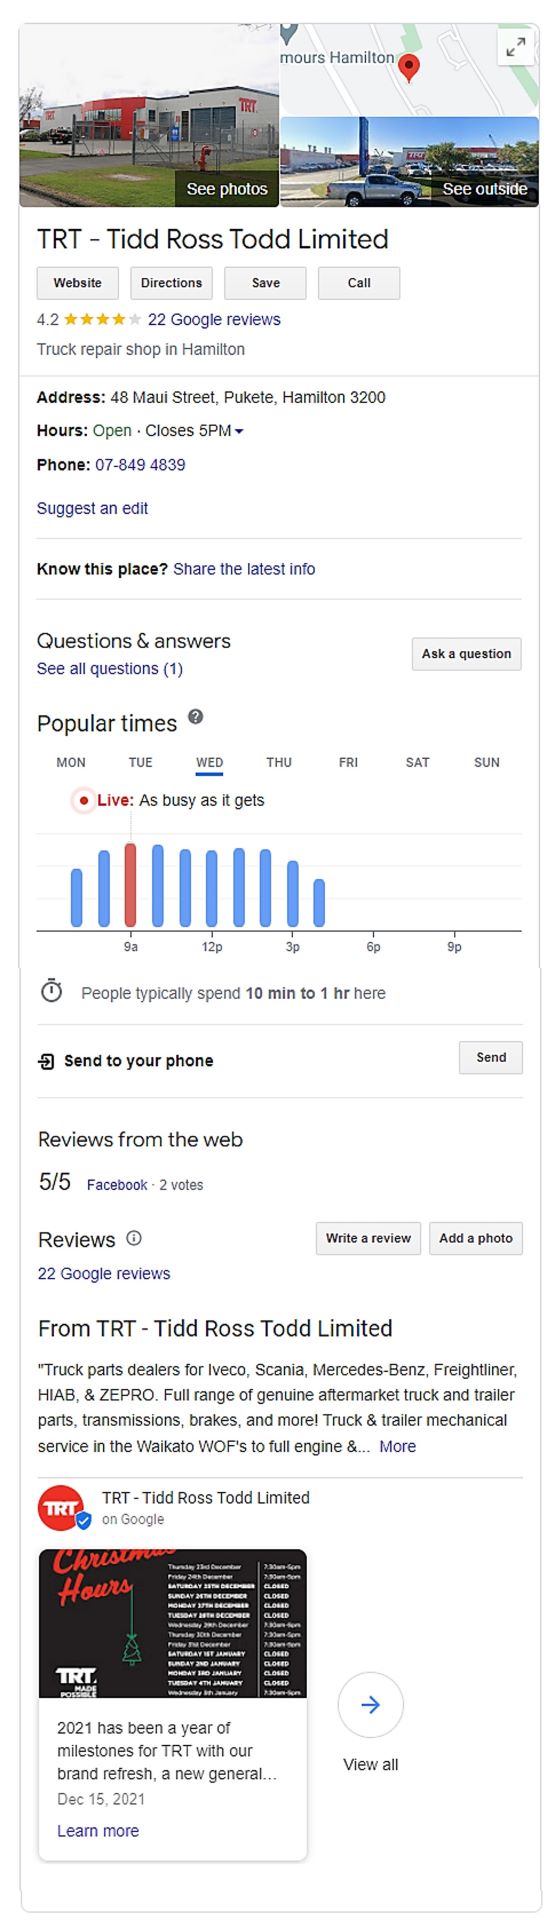 Google Business Profile help with Hamilton SEO results